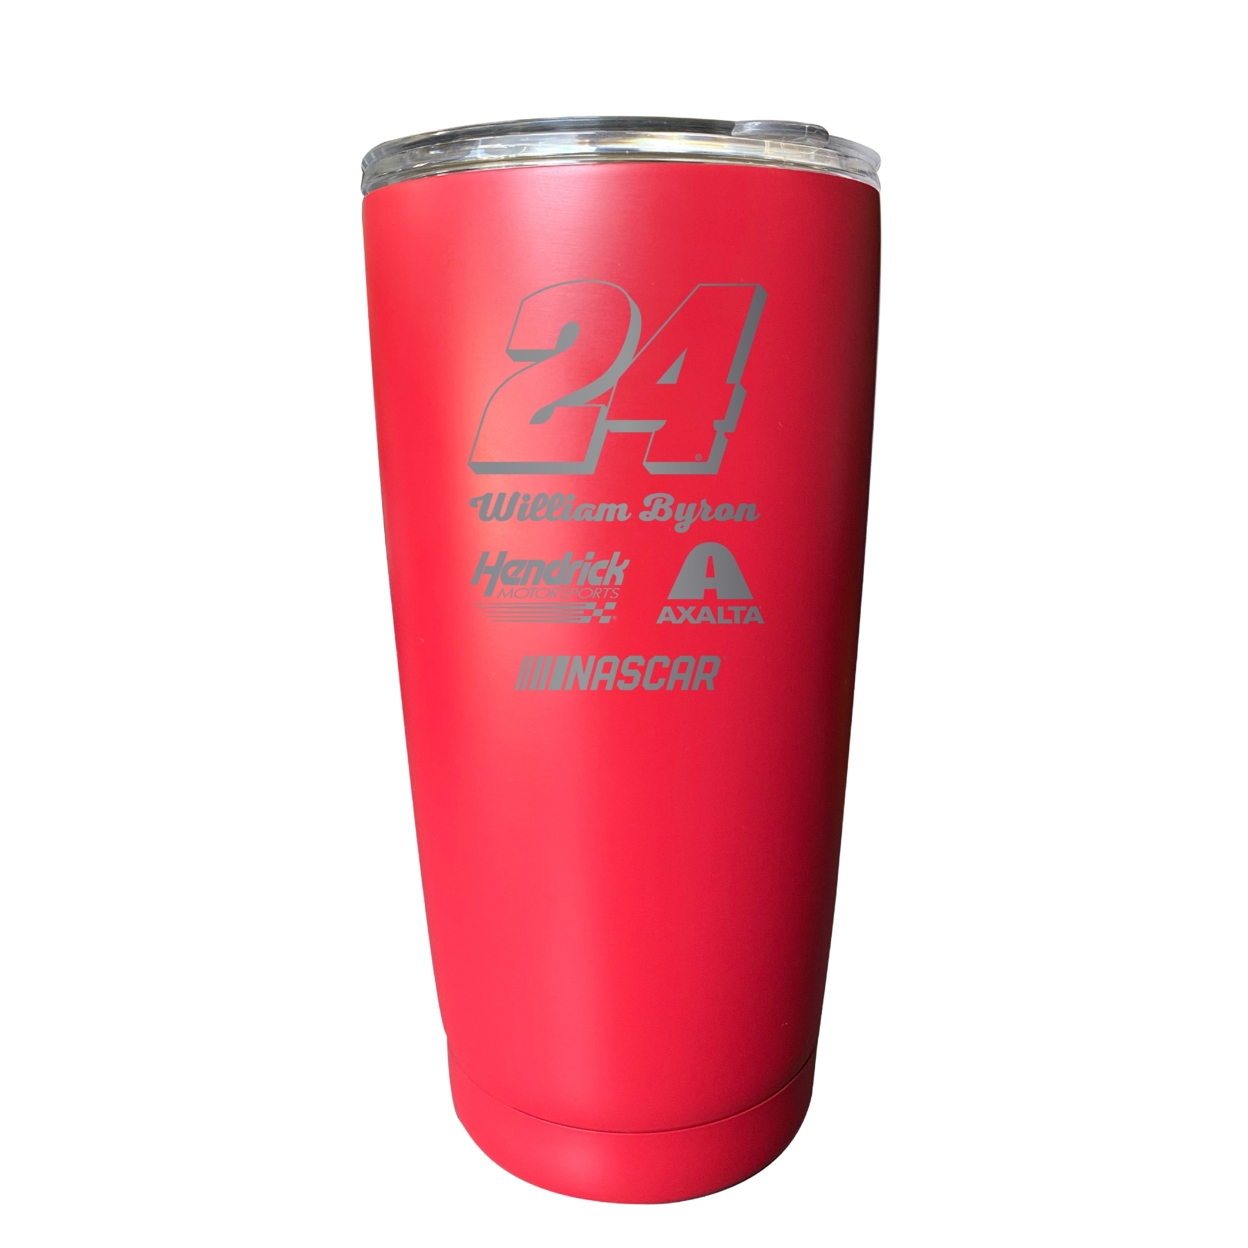 William Byron NASCAR #24 Etched 16 Oz Stainless Steel Tumbler - Red